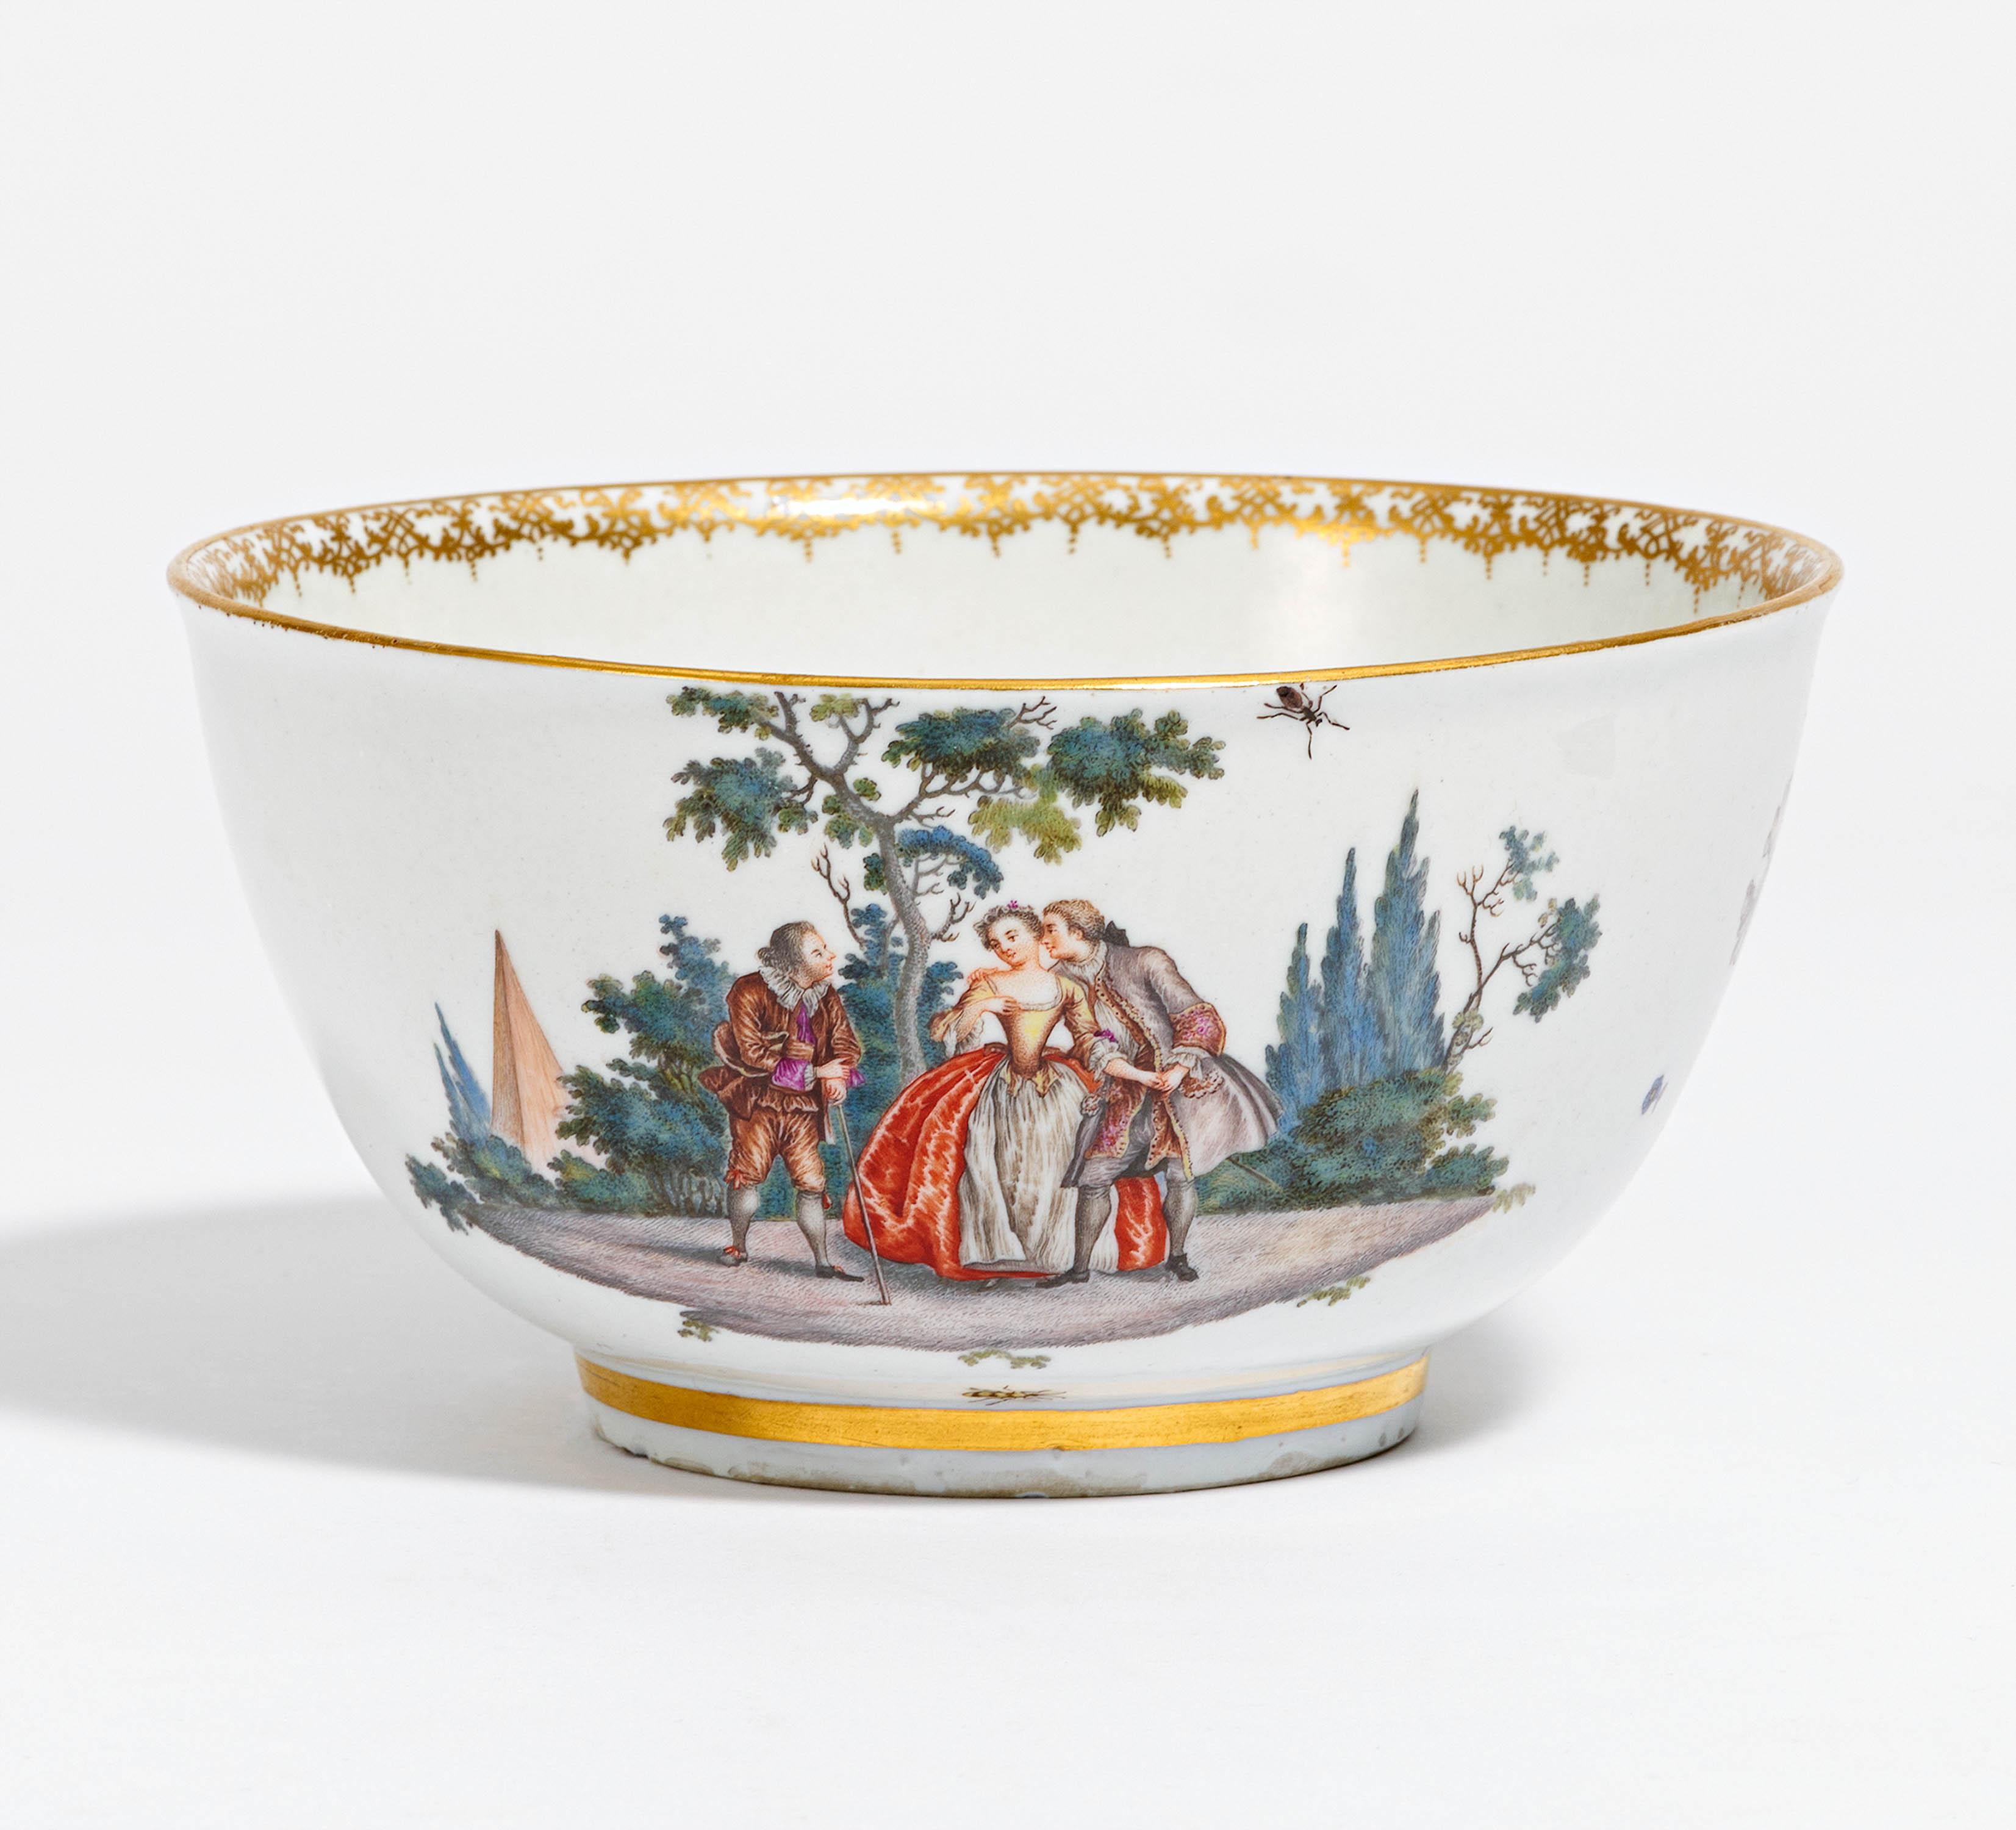 Bowl with Watteau scenes